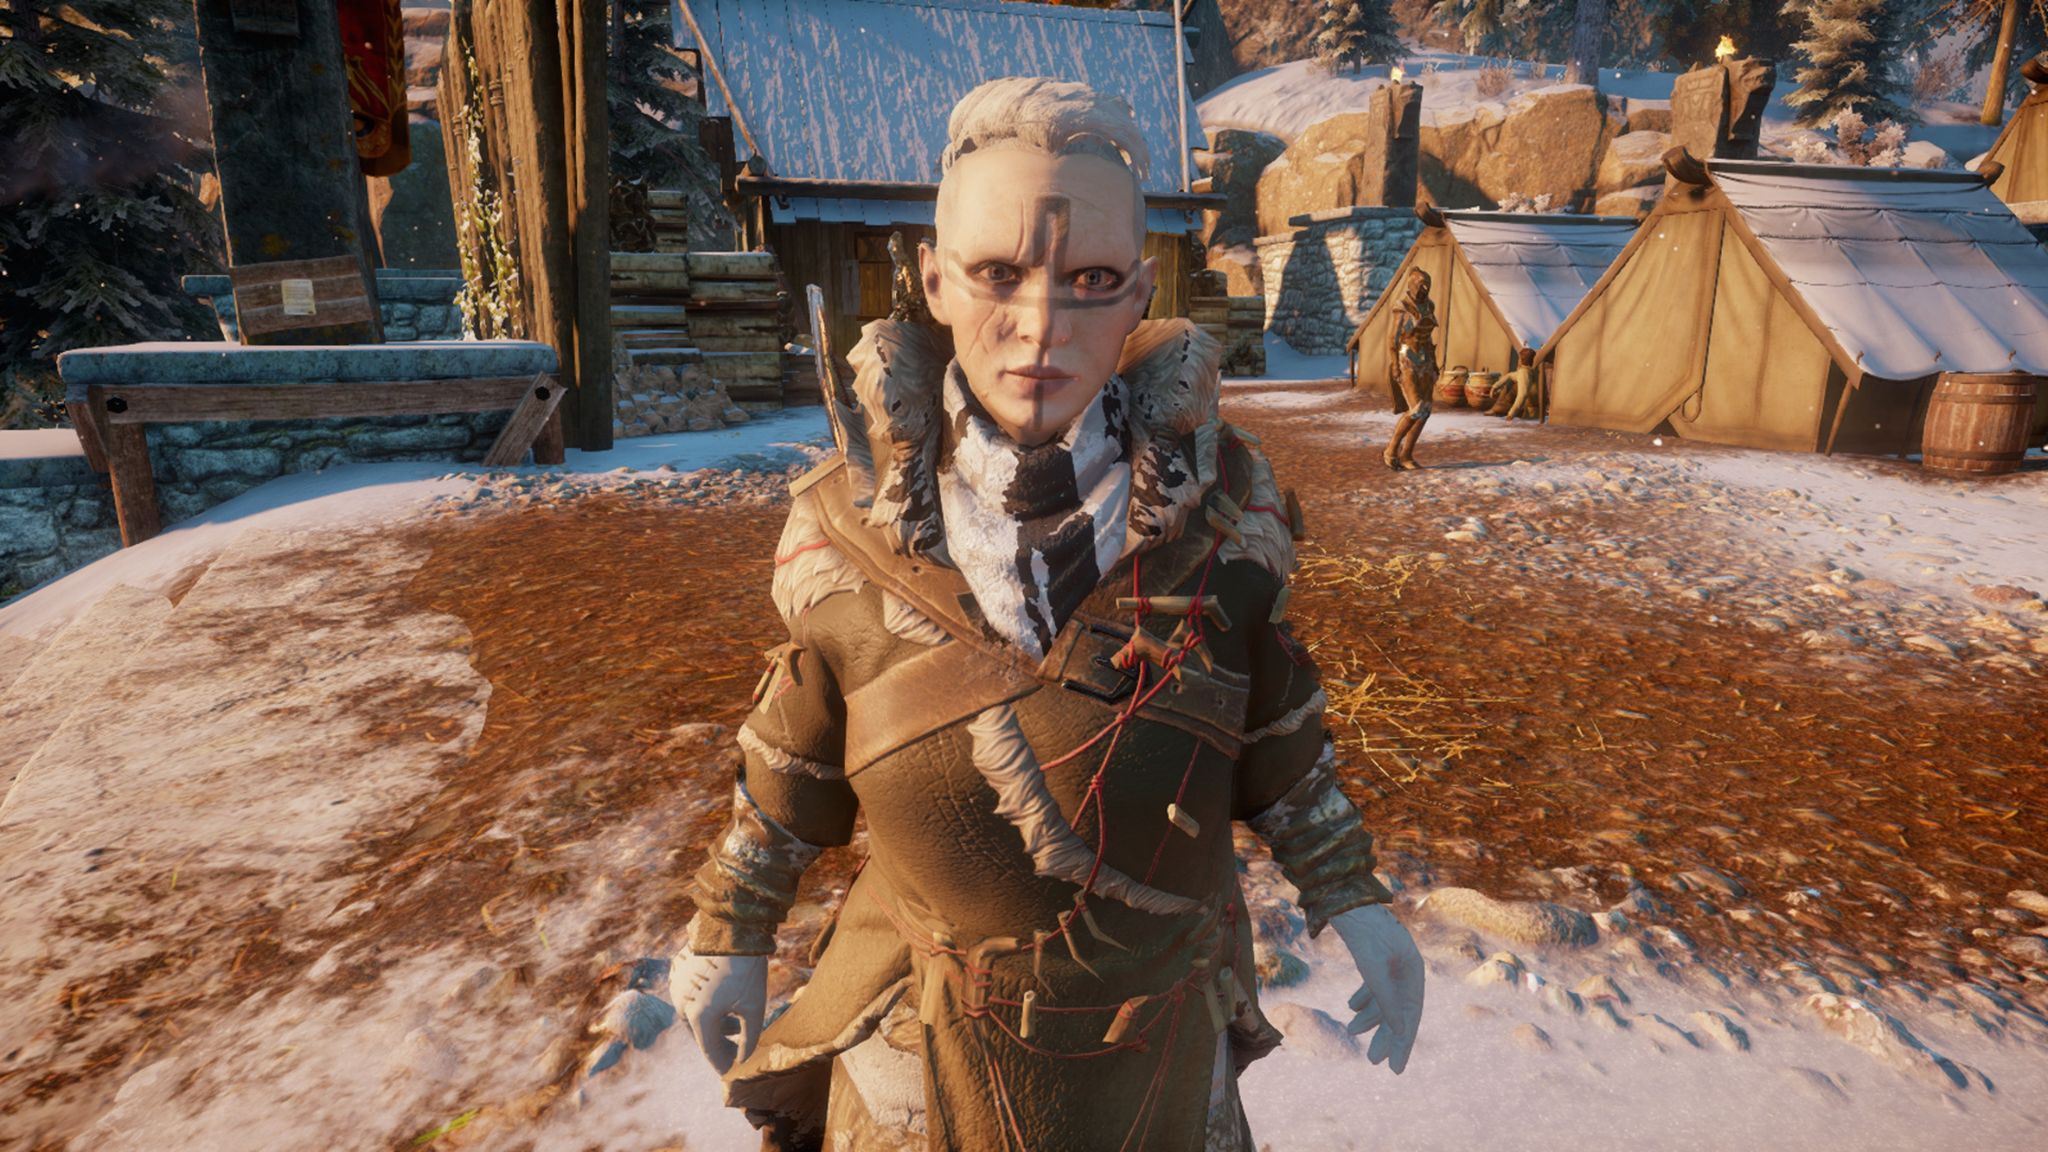 A screenshot from Dragon Age: Inquisition showing a very pale female dwarf with several facial scars and an angular geometric cross-type tattoo going from one temple to the other and from the middle of the forehead down to her chin. The sides of her head are shaved and she's got a mop of white hair on top. She's wearing leathers with animal teeth festooned across it.